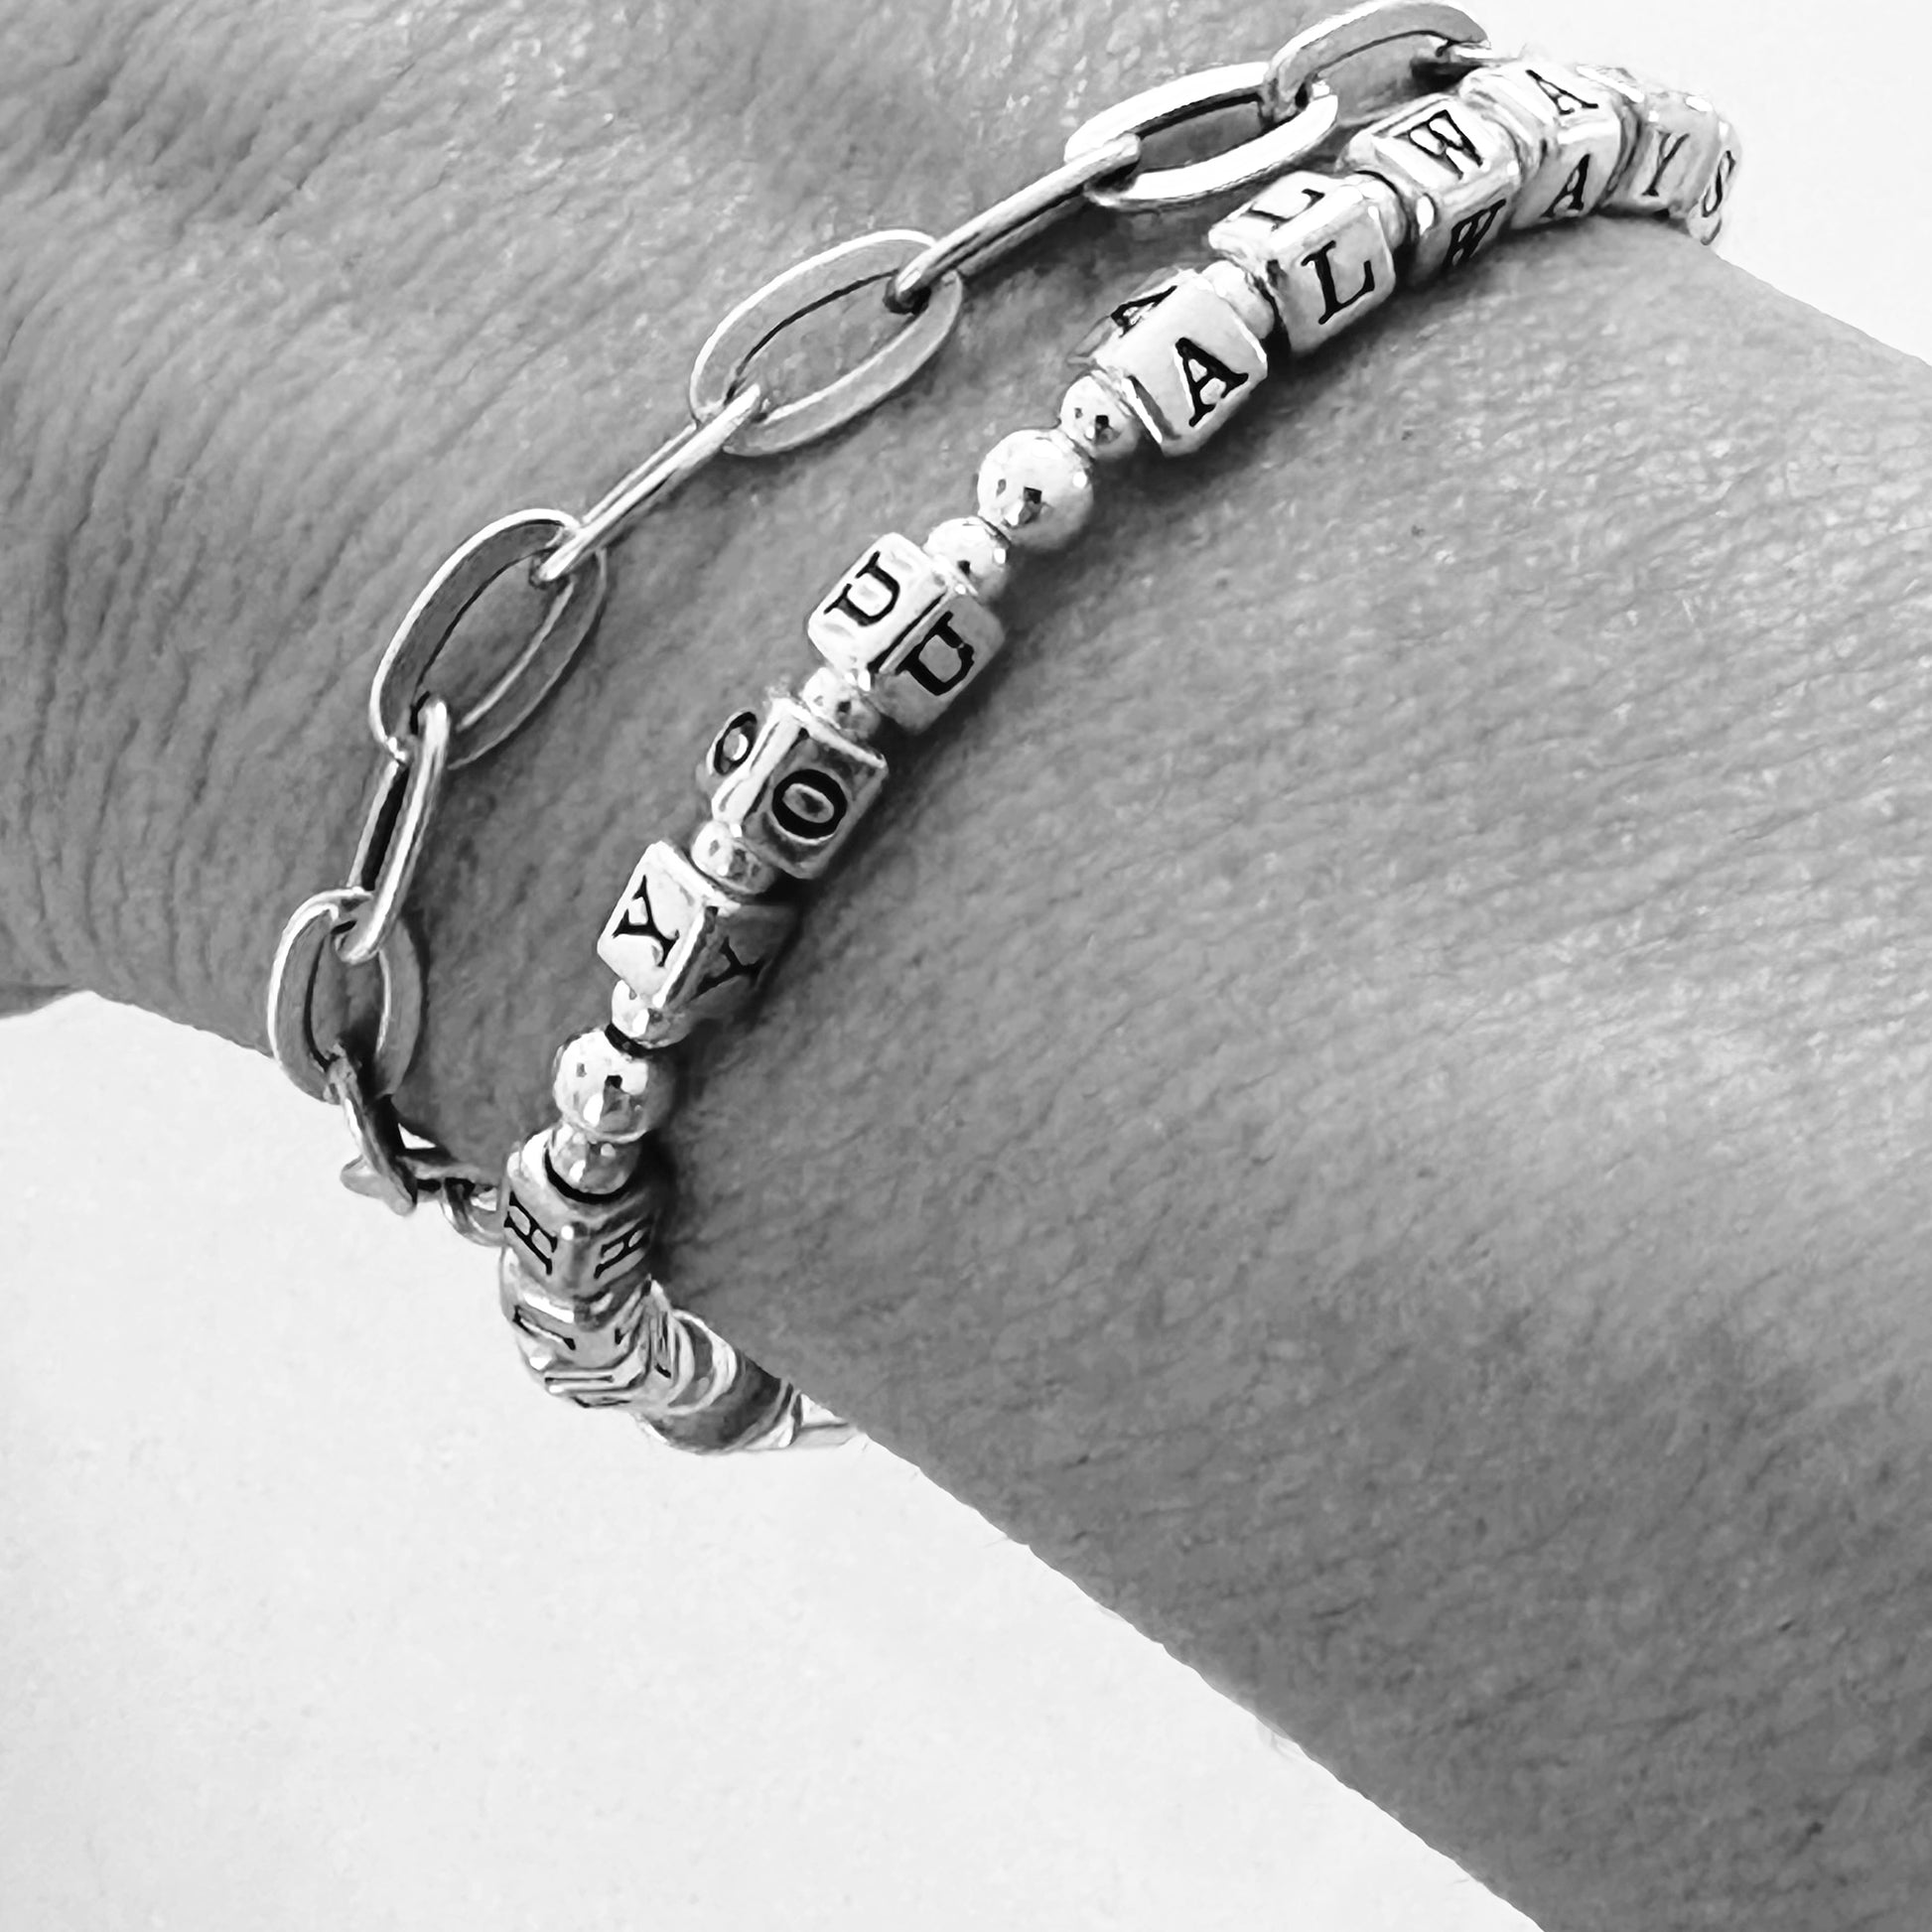 Sterling silver message bracelet with cross charm spells out bible verse Matthew 28:20, "With You Always" 